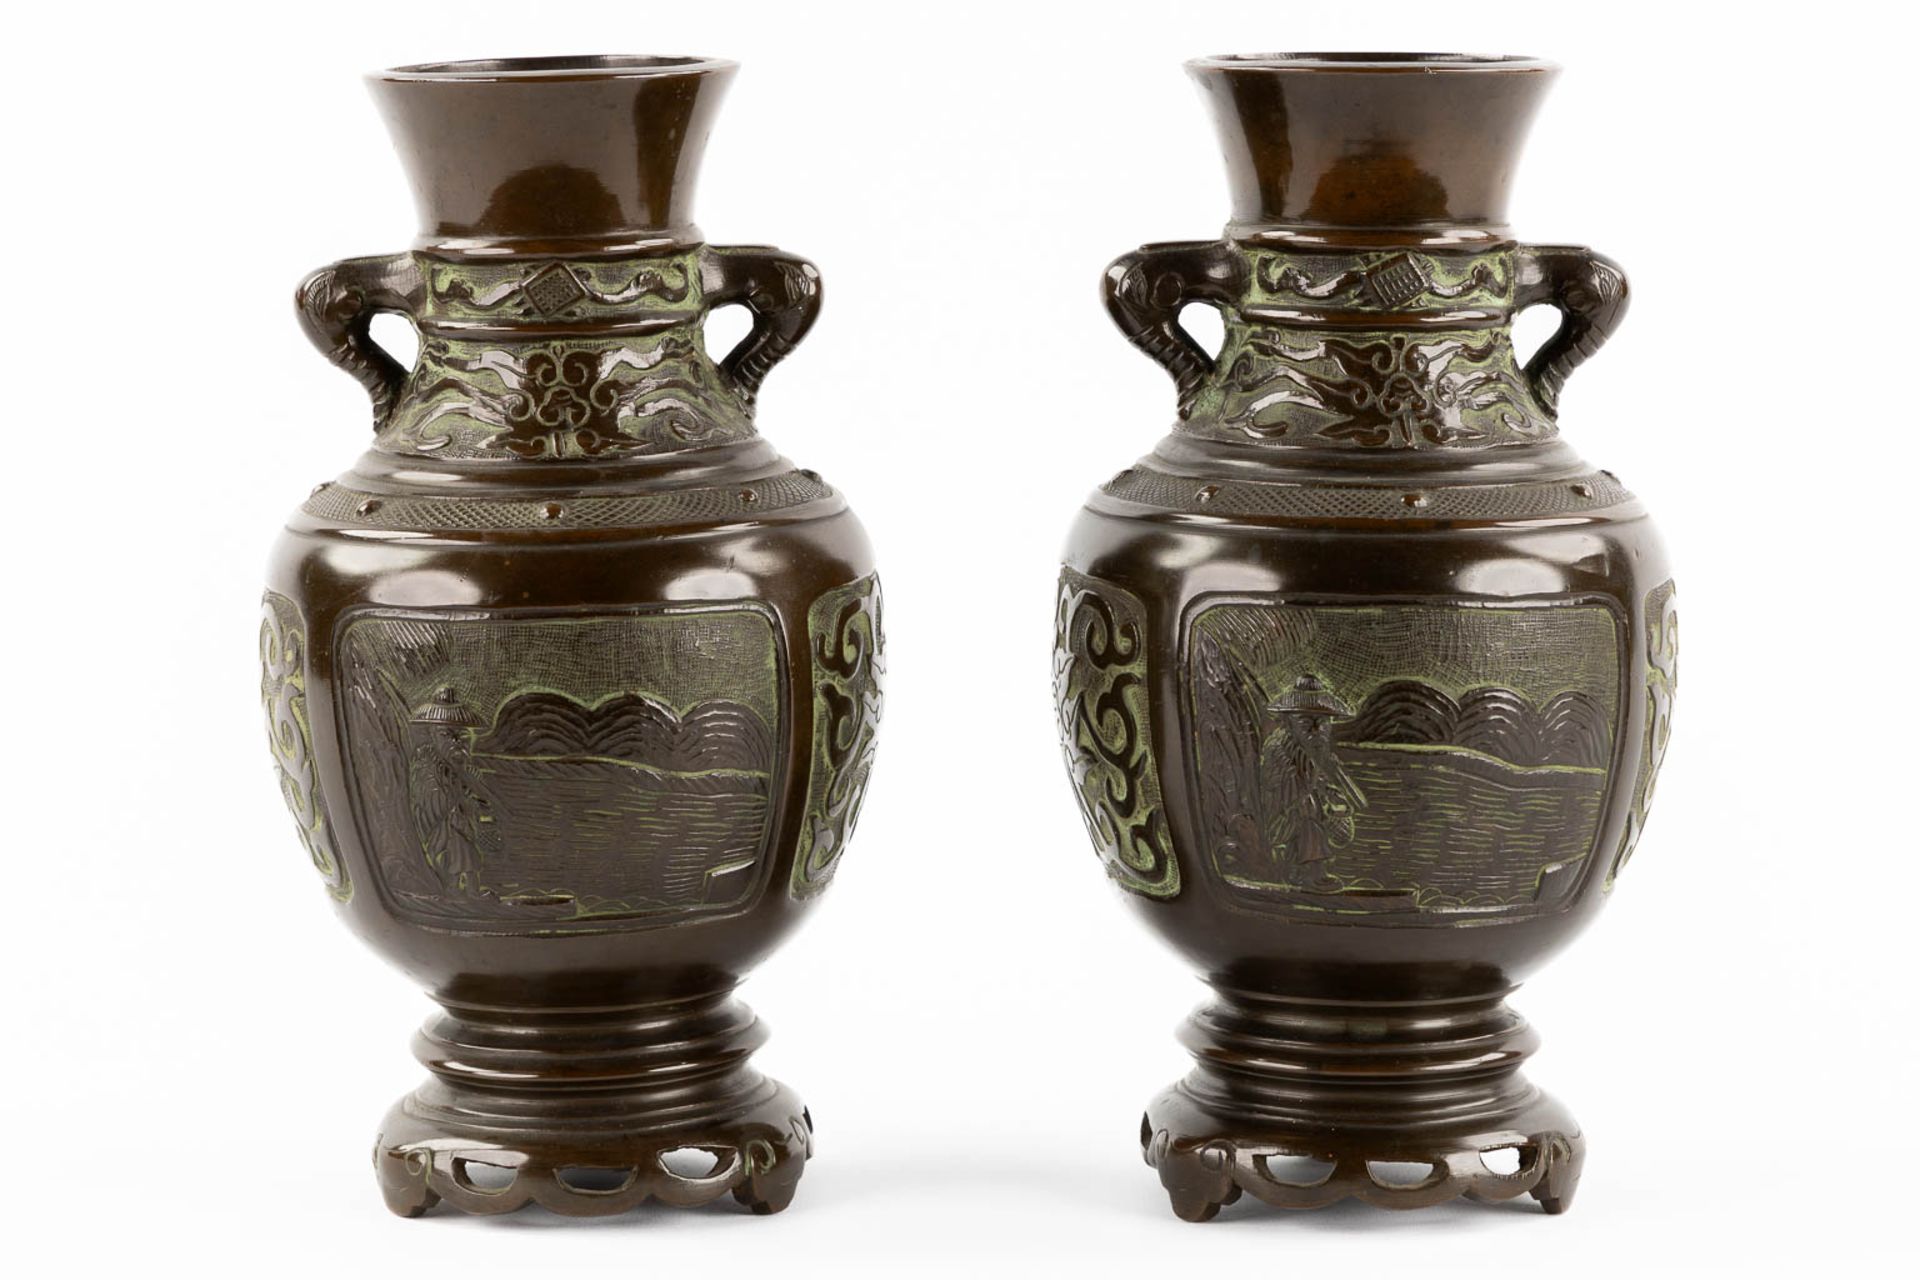 A pair of Japanese vases, patinated bronze. 19th C. (H:26 x D:14 cm) - Image 3 of 11